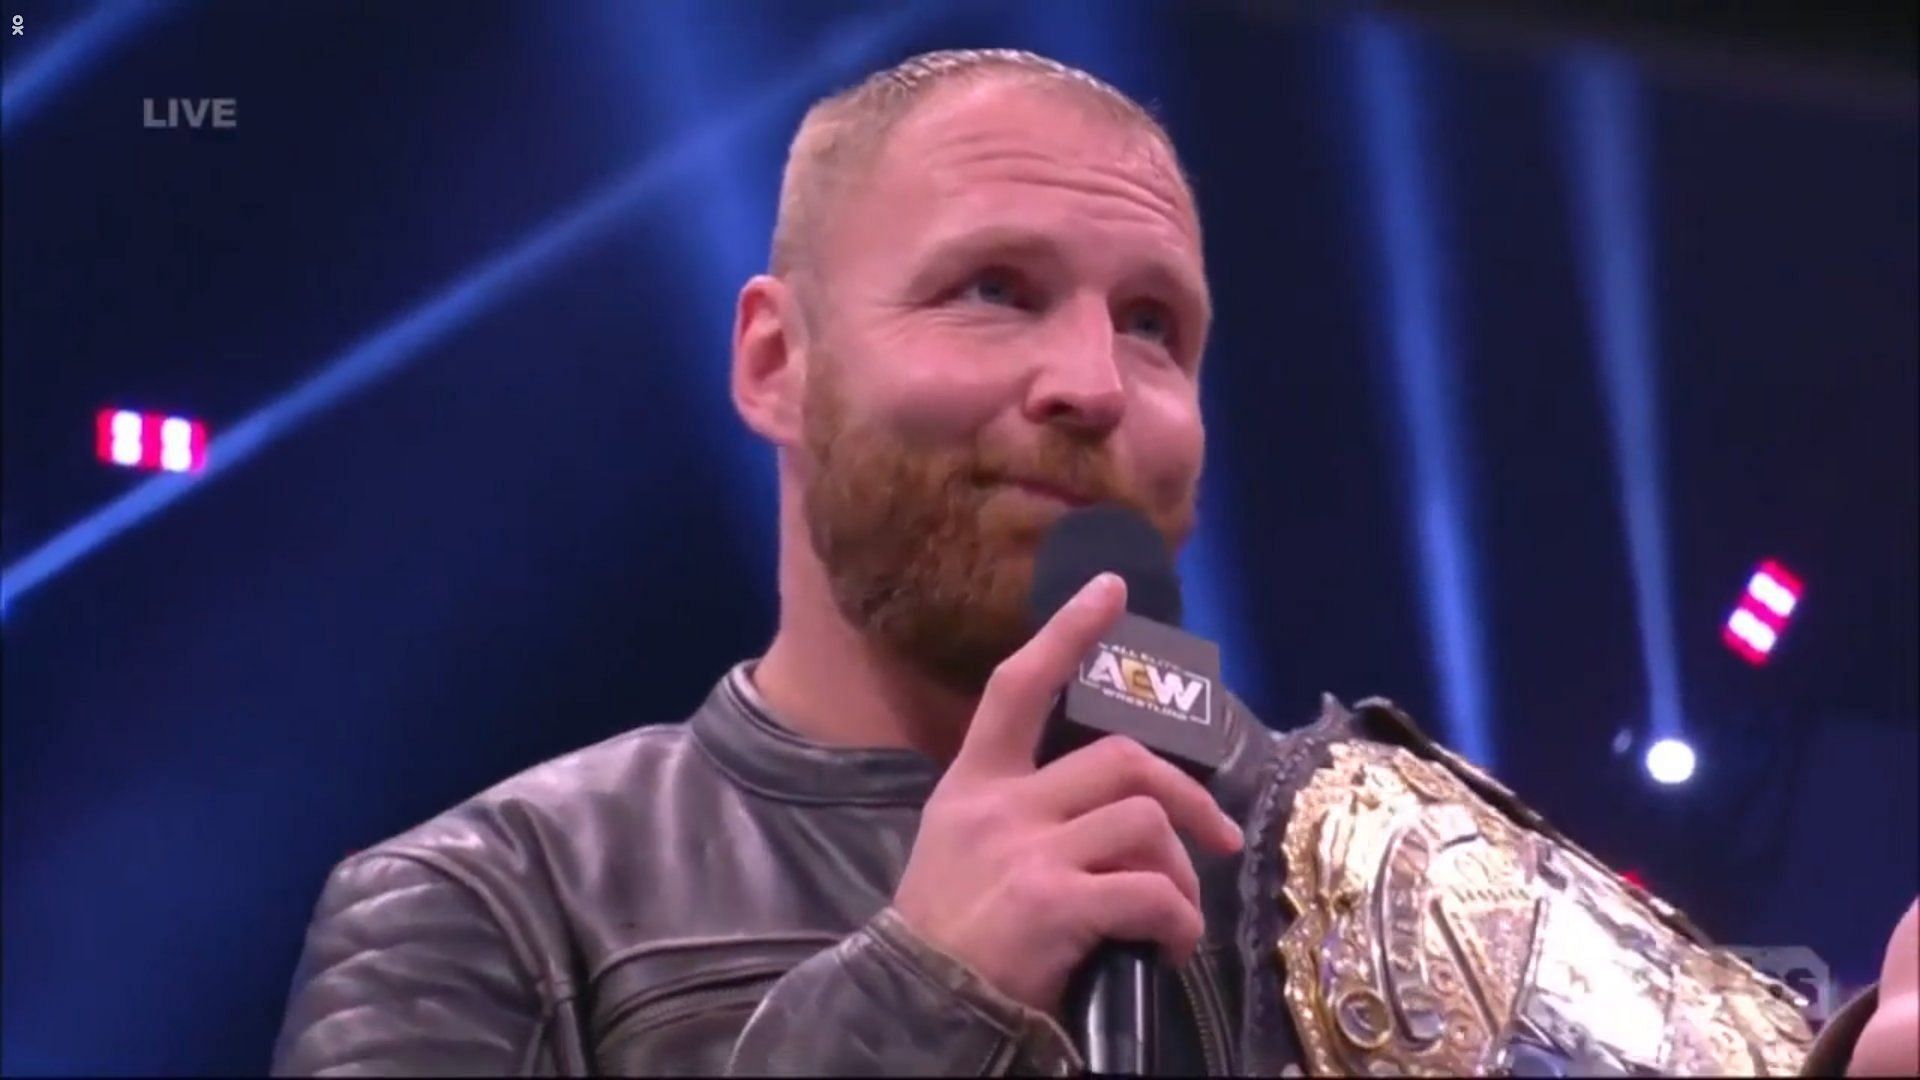 Jon Moxley issued an challenge via an open contract earlier on Dynamite.